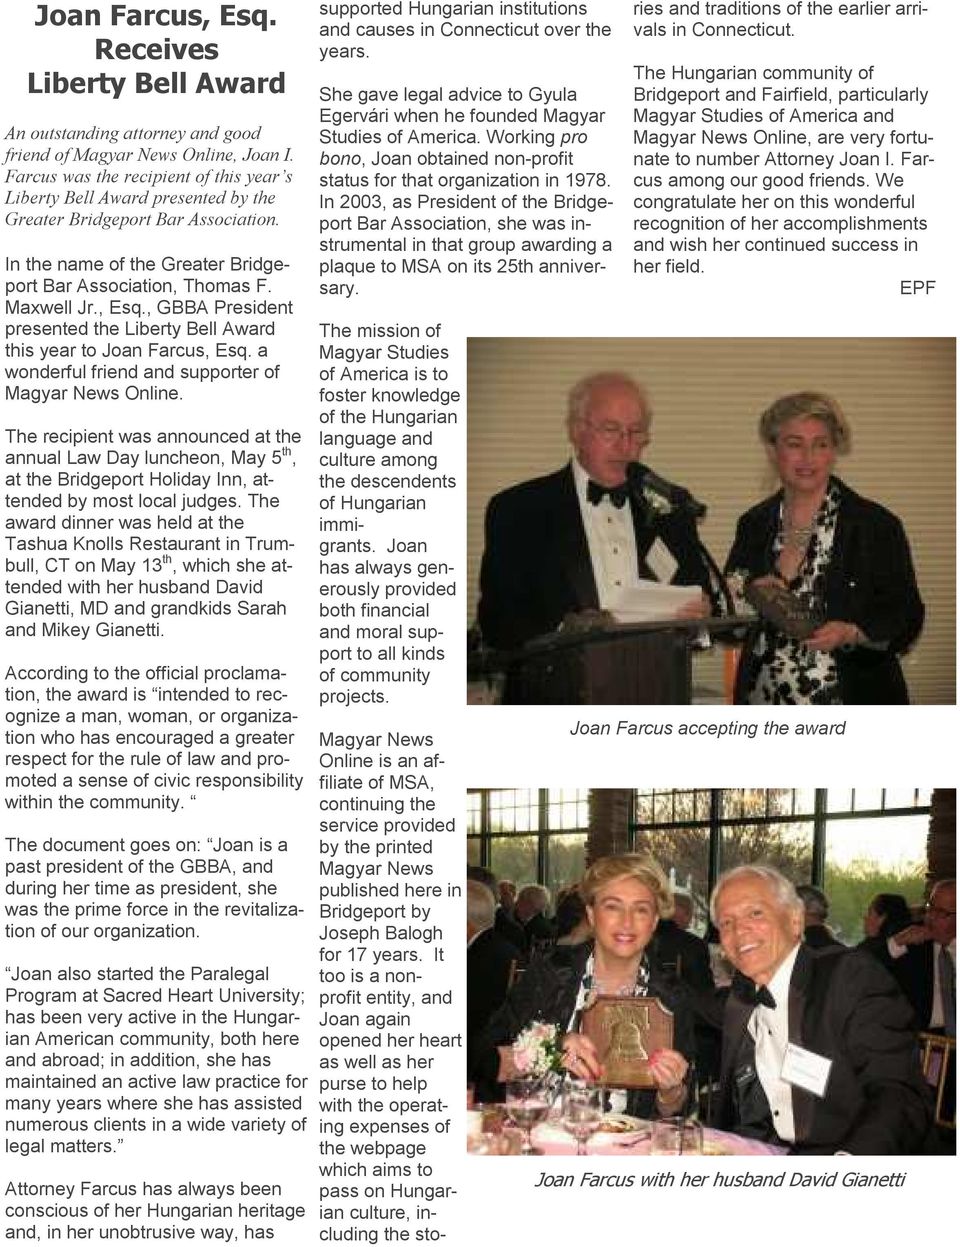 , GBBA President presented the Liberty Bell Award this year to Joan Farcus, Esq. a wonderful friend and supporter of Magyar News Online.